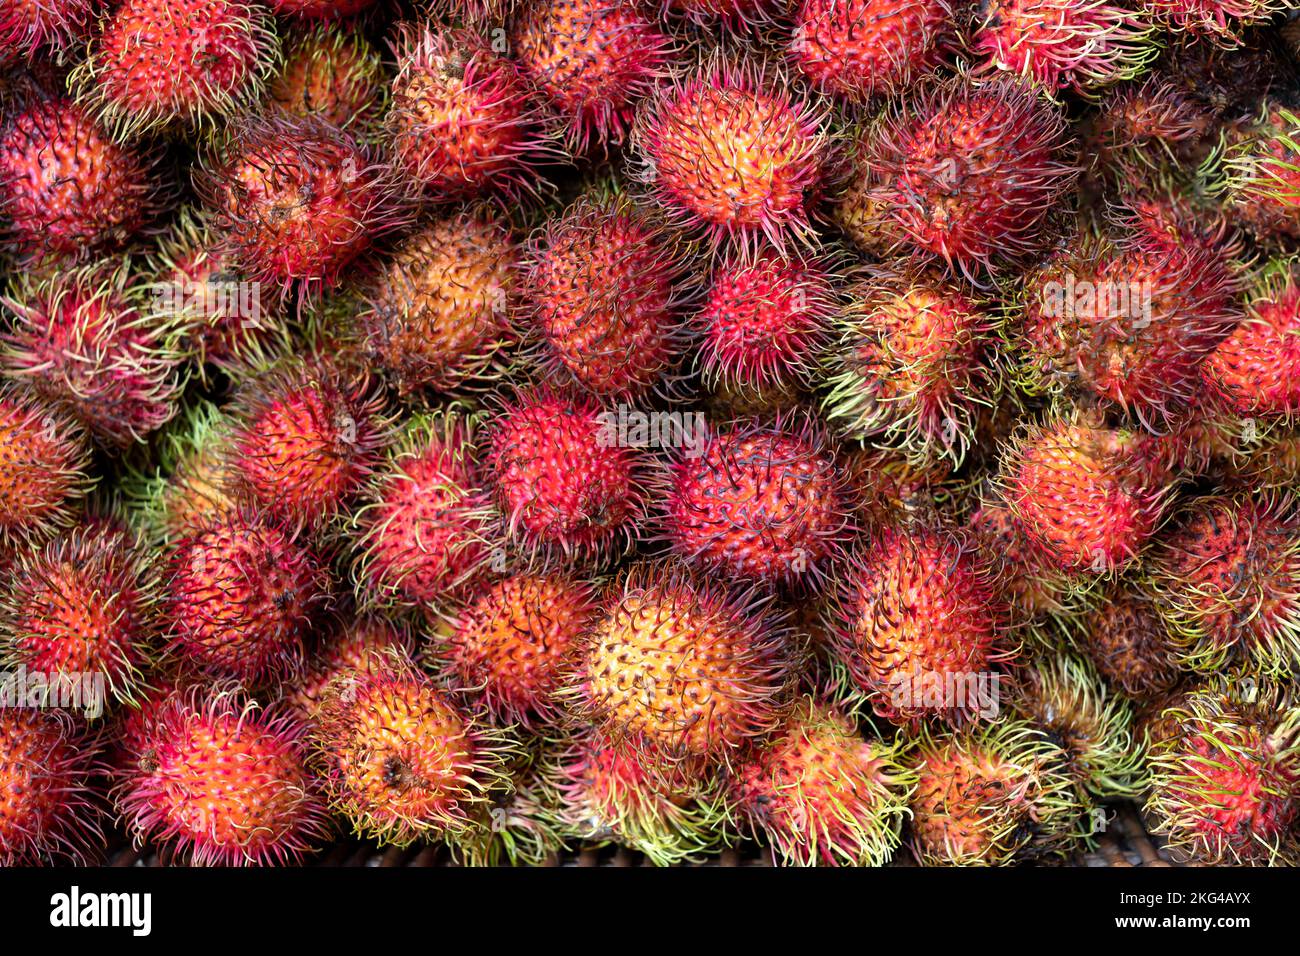 A display of fresh red Rambutan fruit Nephelium lappaceum The tropical fruit are displayed and on sell in a UK market. Rich in Antioxidants, nutrients Stock Photo